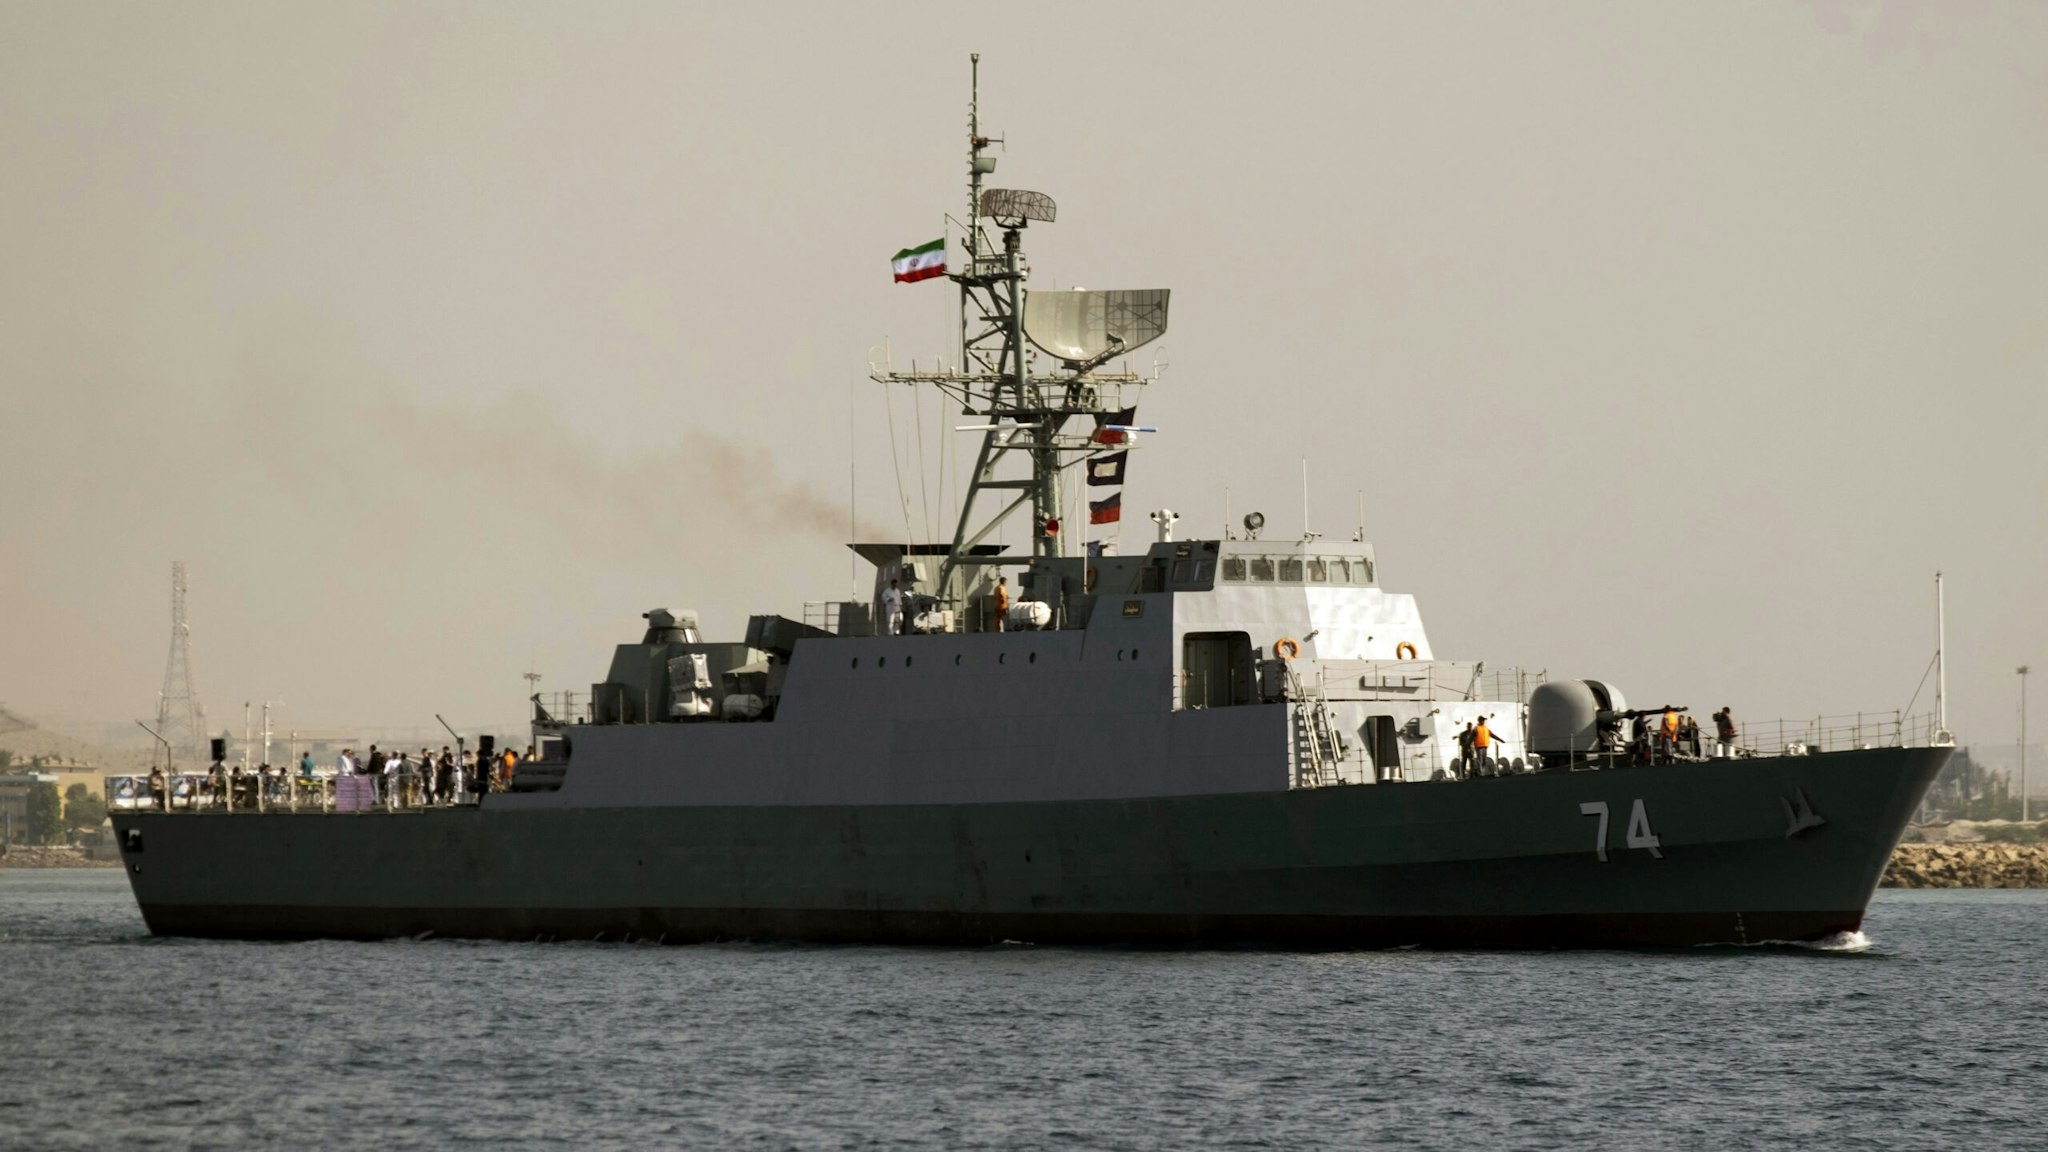 Iranian Navy Sahand warship sails along the Persian Gulf near the strait of Hormuz about 1320km (820 miles) south of Tehran, April 30, 2019.